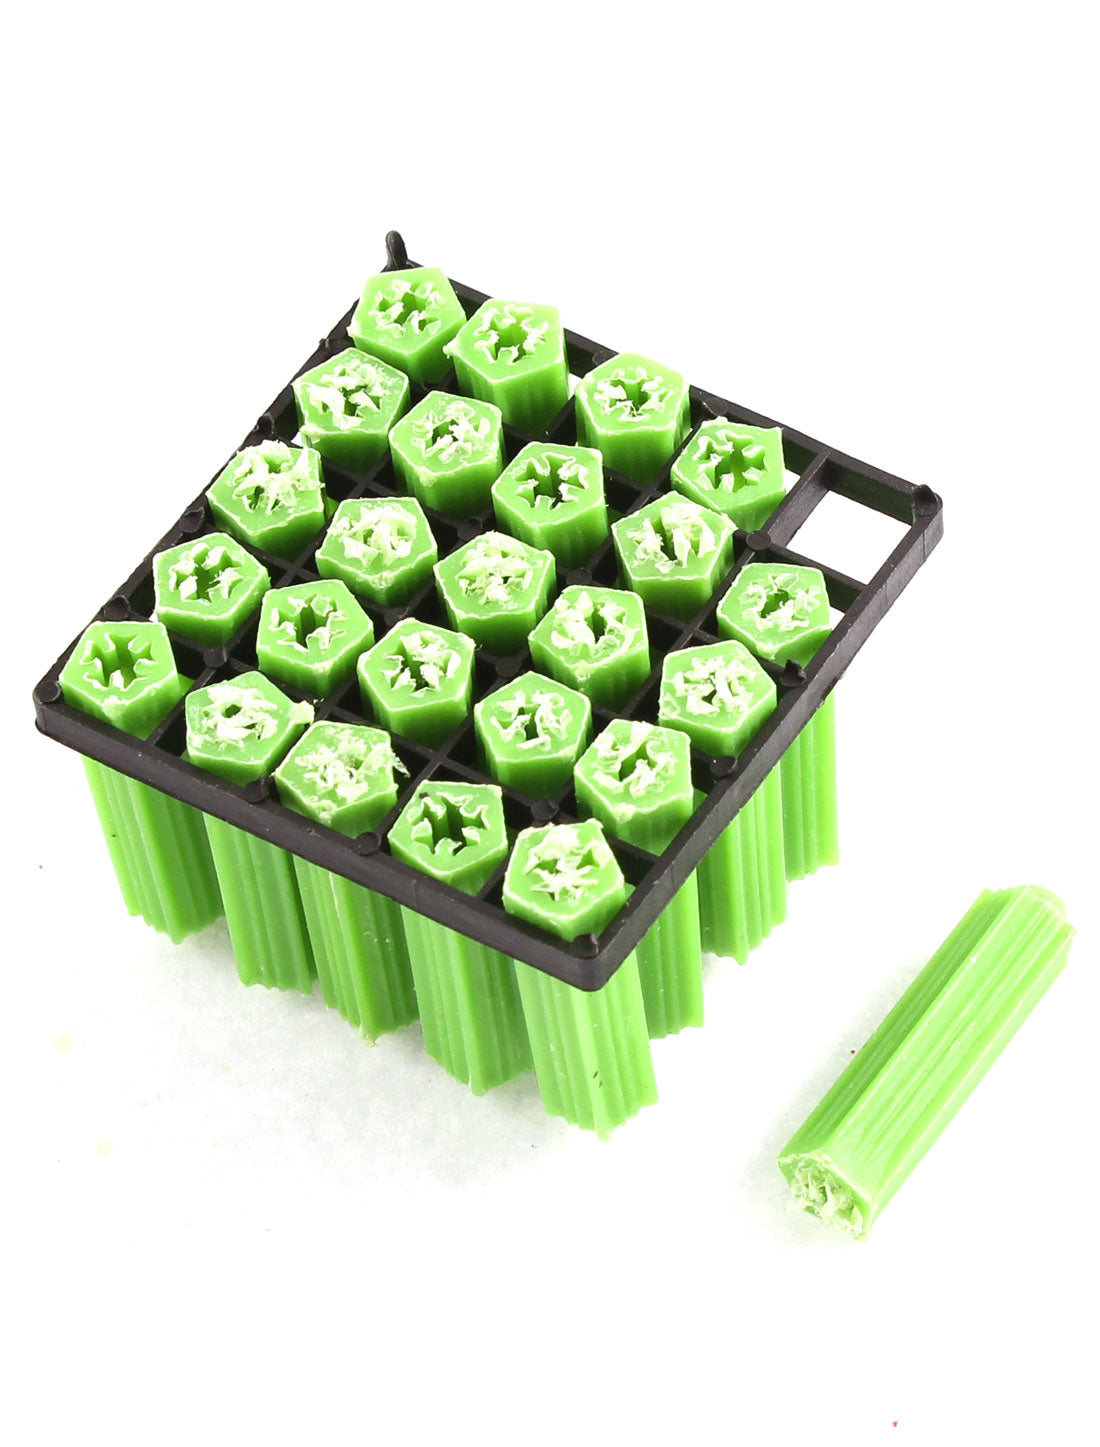 uxcell Uxcell 125Pcs Green Plastic Masonry Screws Anchor Fixing Star Wall Connector 7x26mm